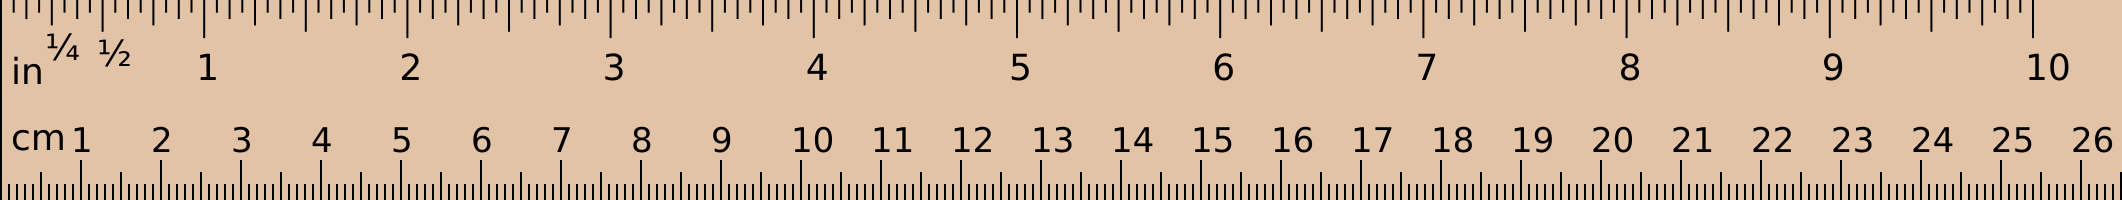 The ruler image